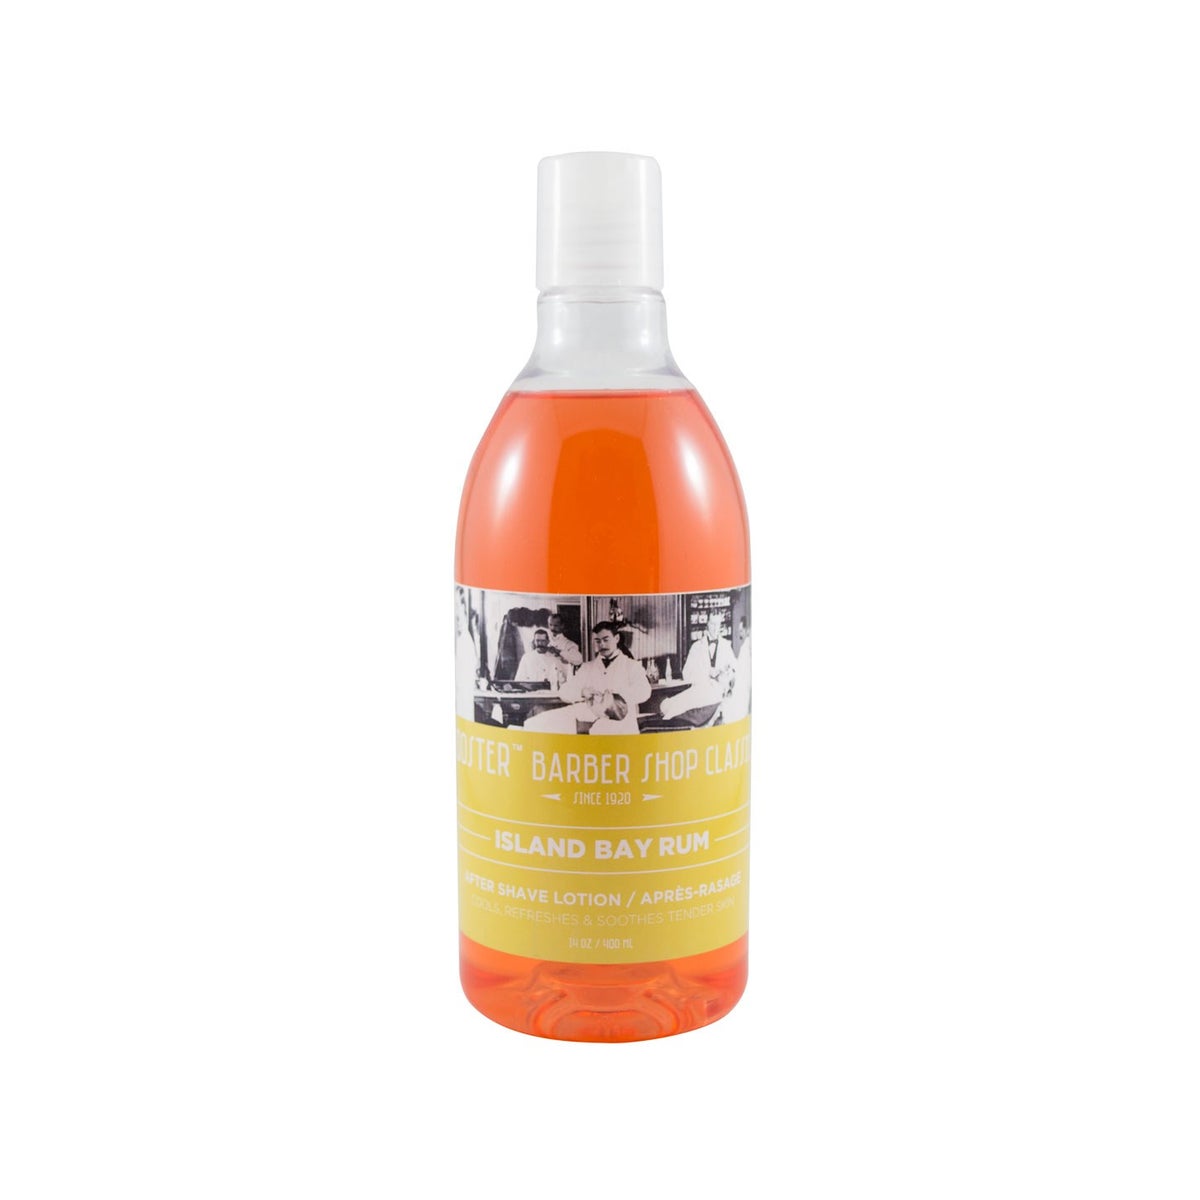 BOOSTER BAY RUM AFTER SHAVE LOTION 400ml